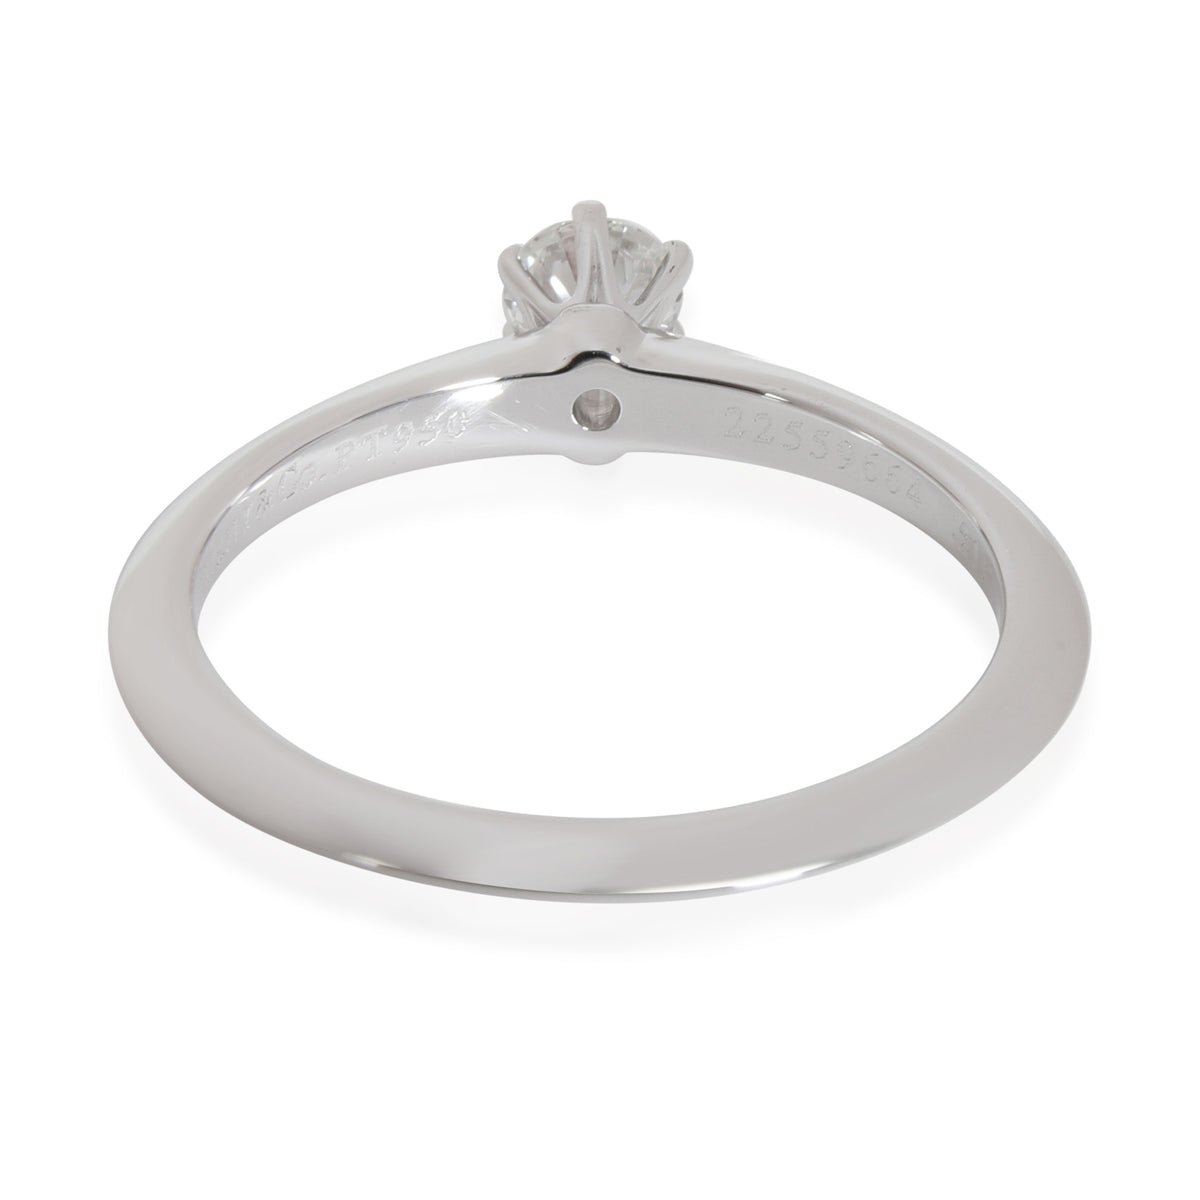 Tiffany & Co. Diamond Solitaire Engagement Ring in Platinum G IF 0.21 CTW